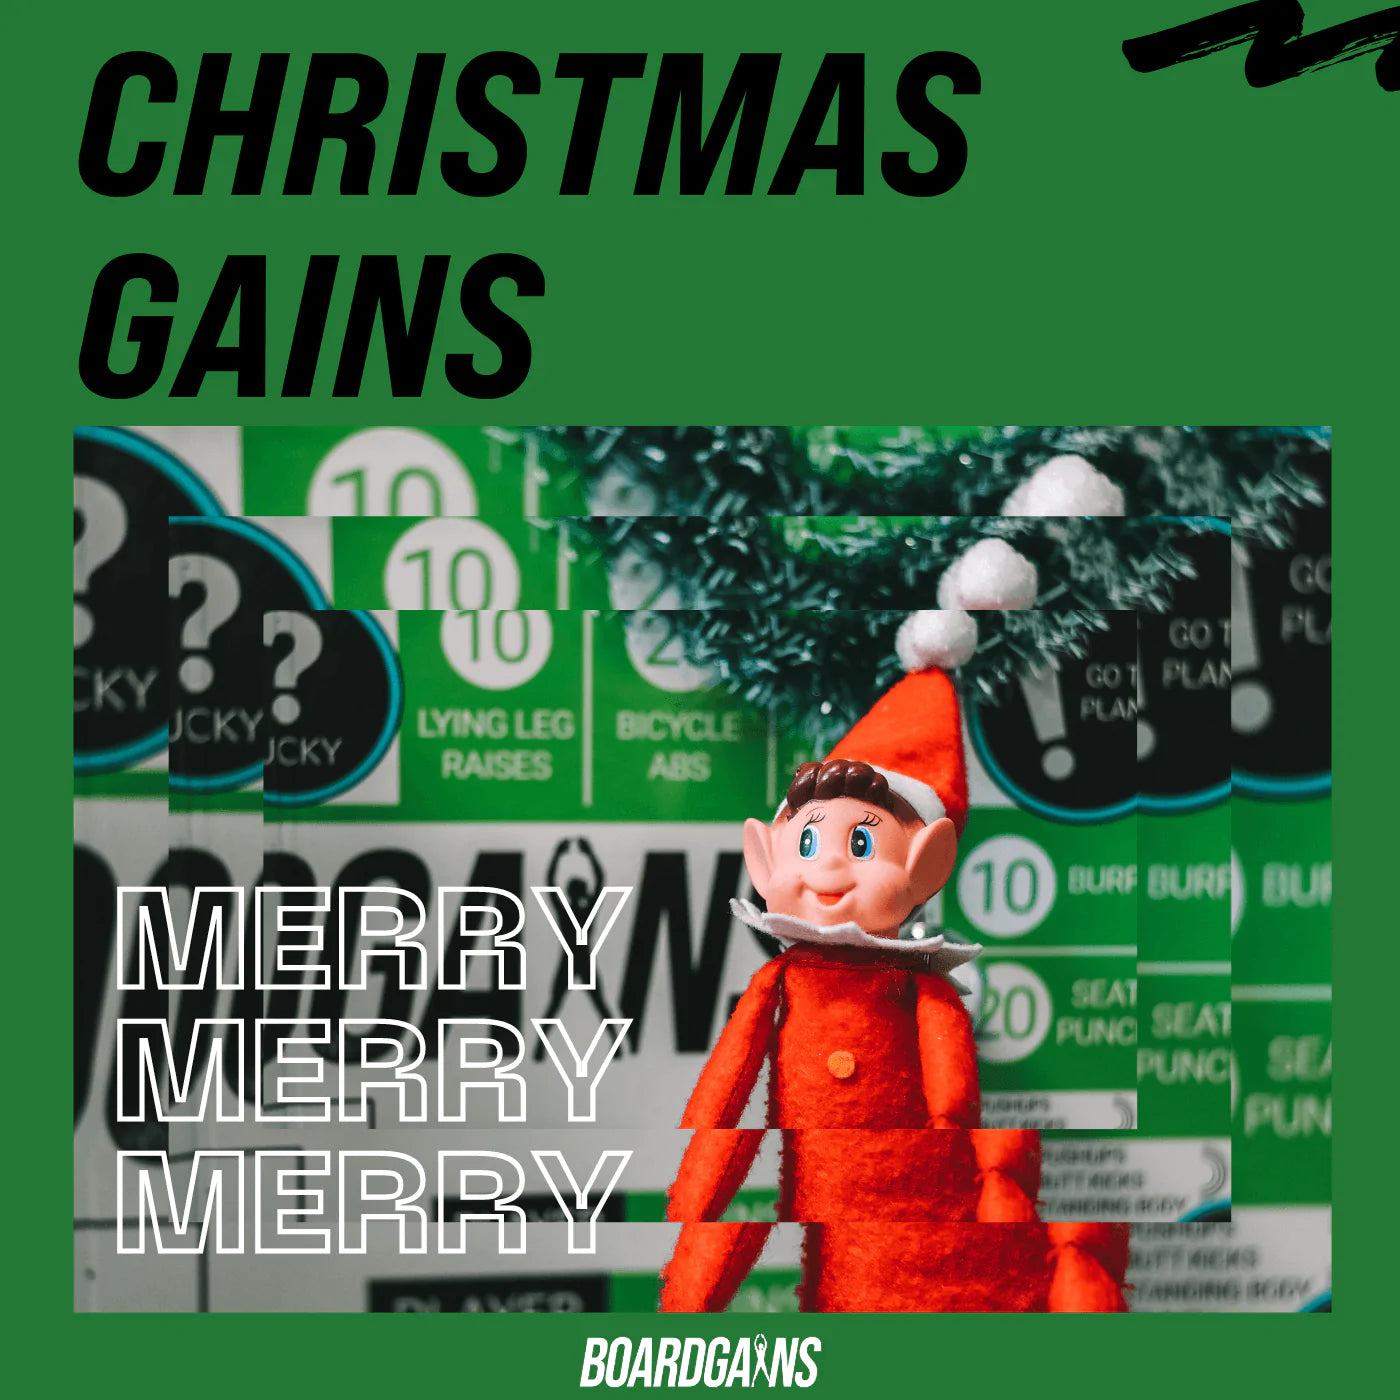 Christmas Music Playlist For Parties, Events, Workouts, Etc. - Boardgains